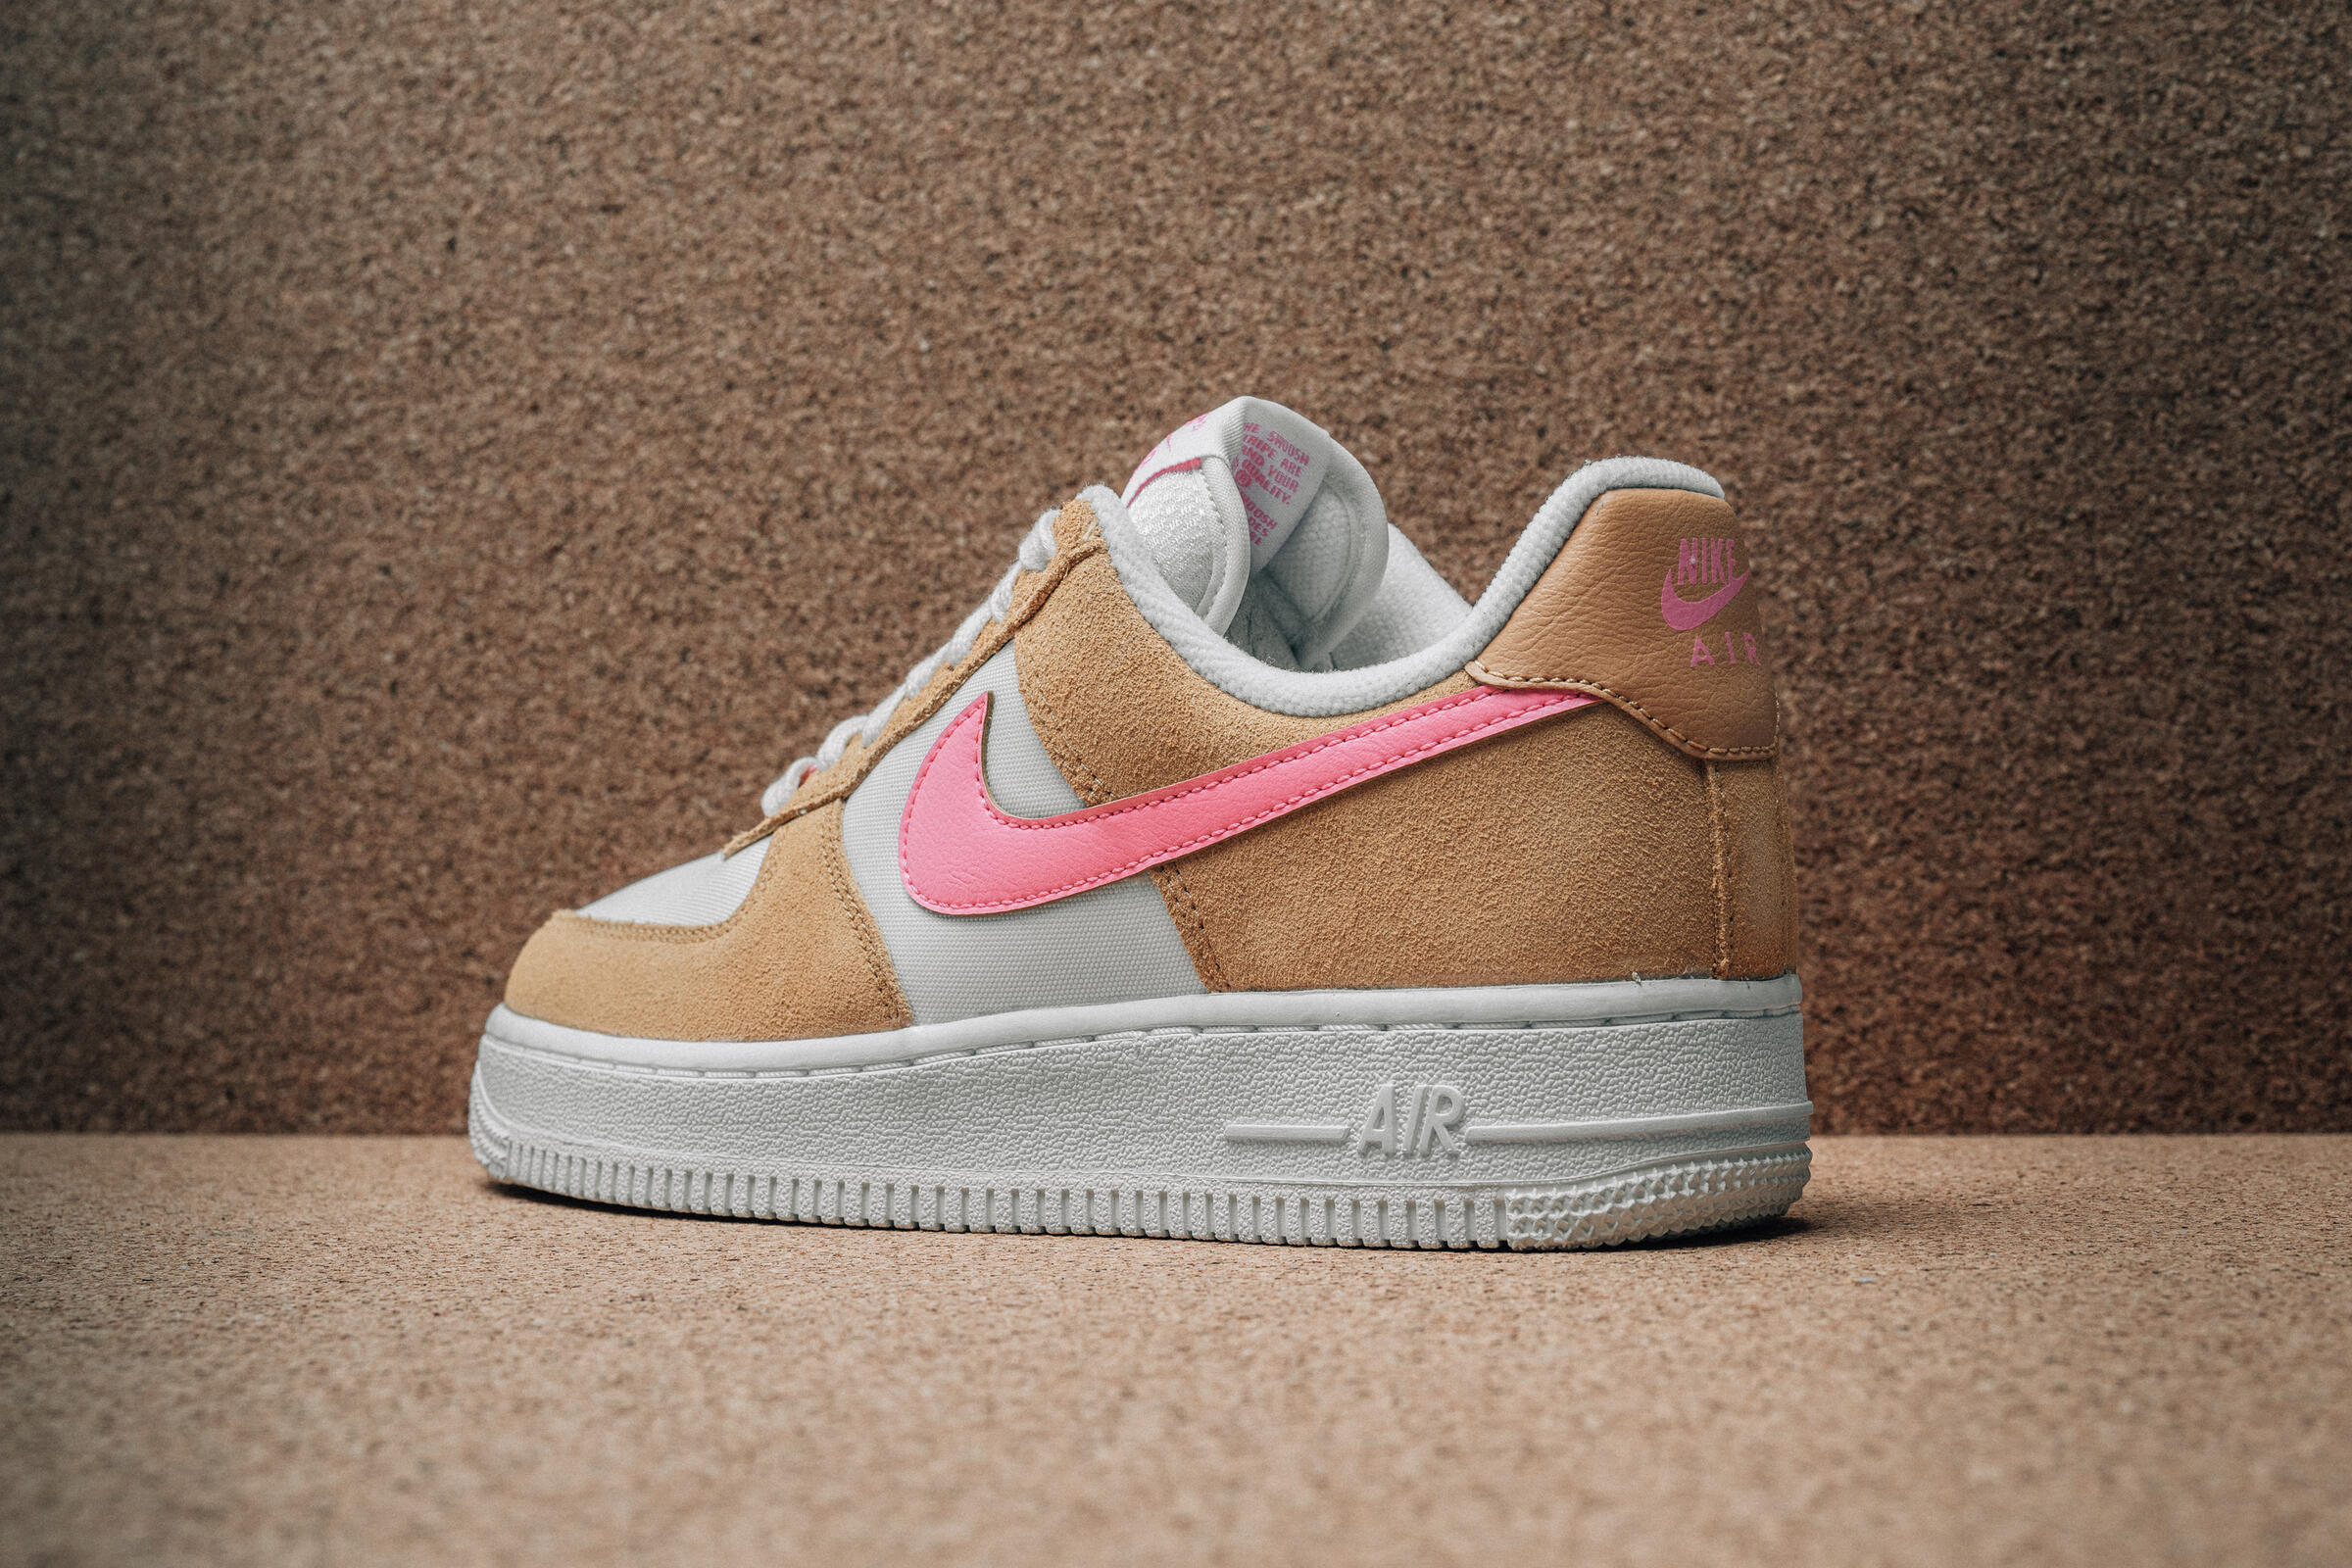 Nike WMNS AIR FORCE 1 '07 "TWINE"